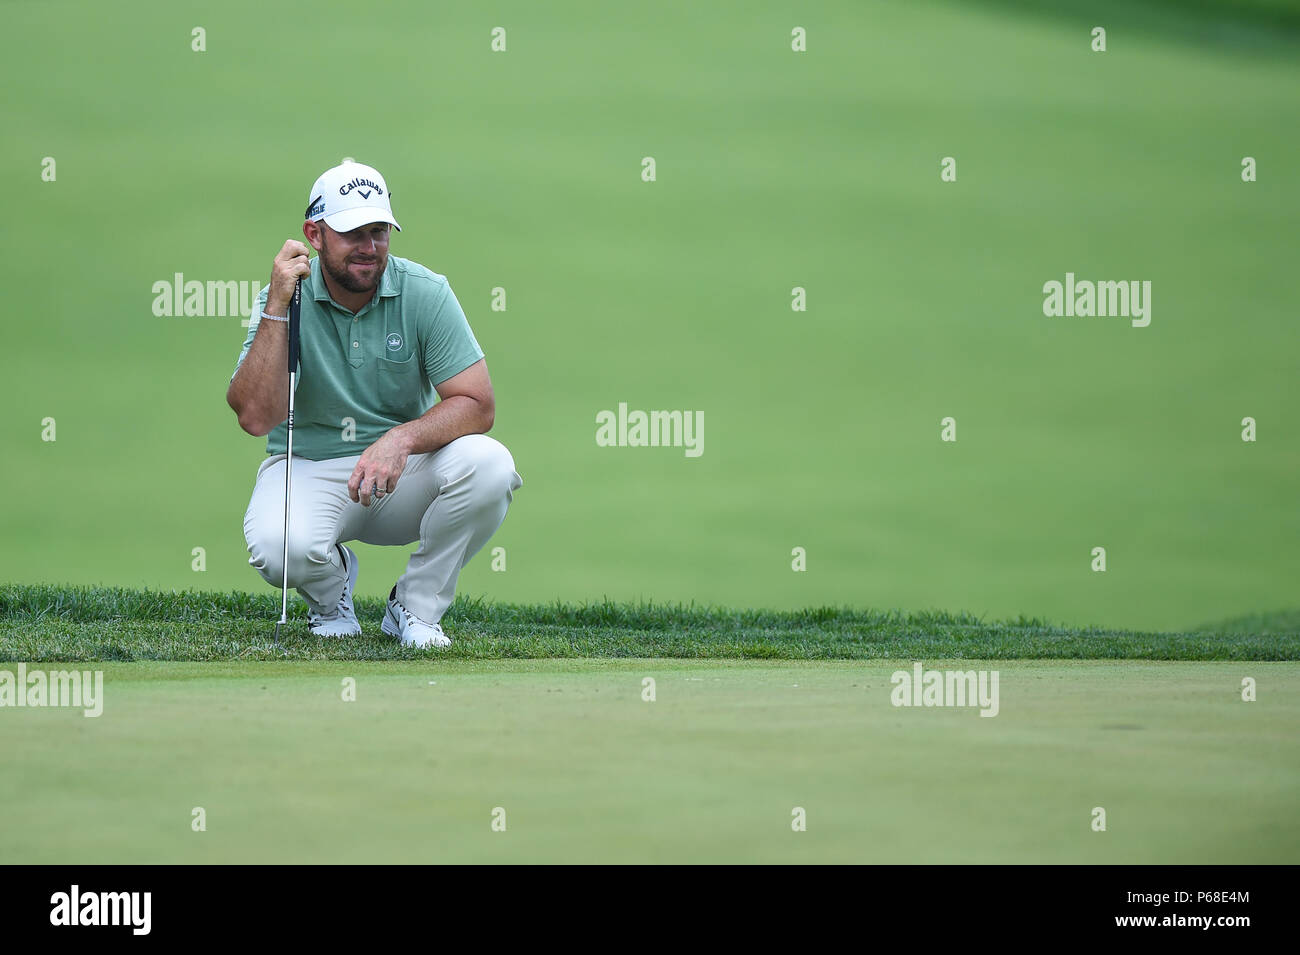 Potomac MD, USA. 28th June, 2018. Scott Brown (USA) eyes up his putt on the seventh hole during the opening round at the 2018 Quicken Loans National at the Tournament Players Club in Potomac MD. Credit: Cal Sport Media/Alamy Live News Stock Photo